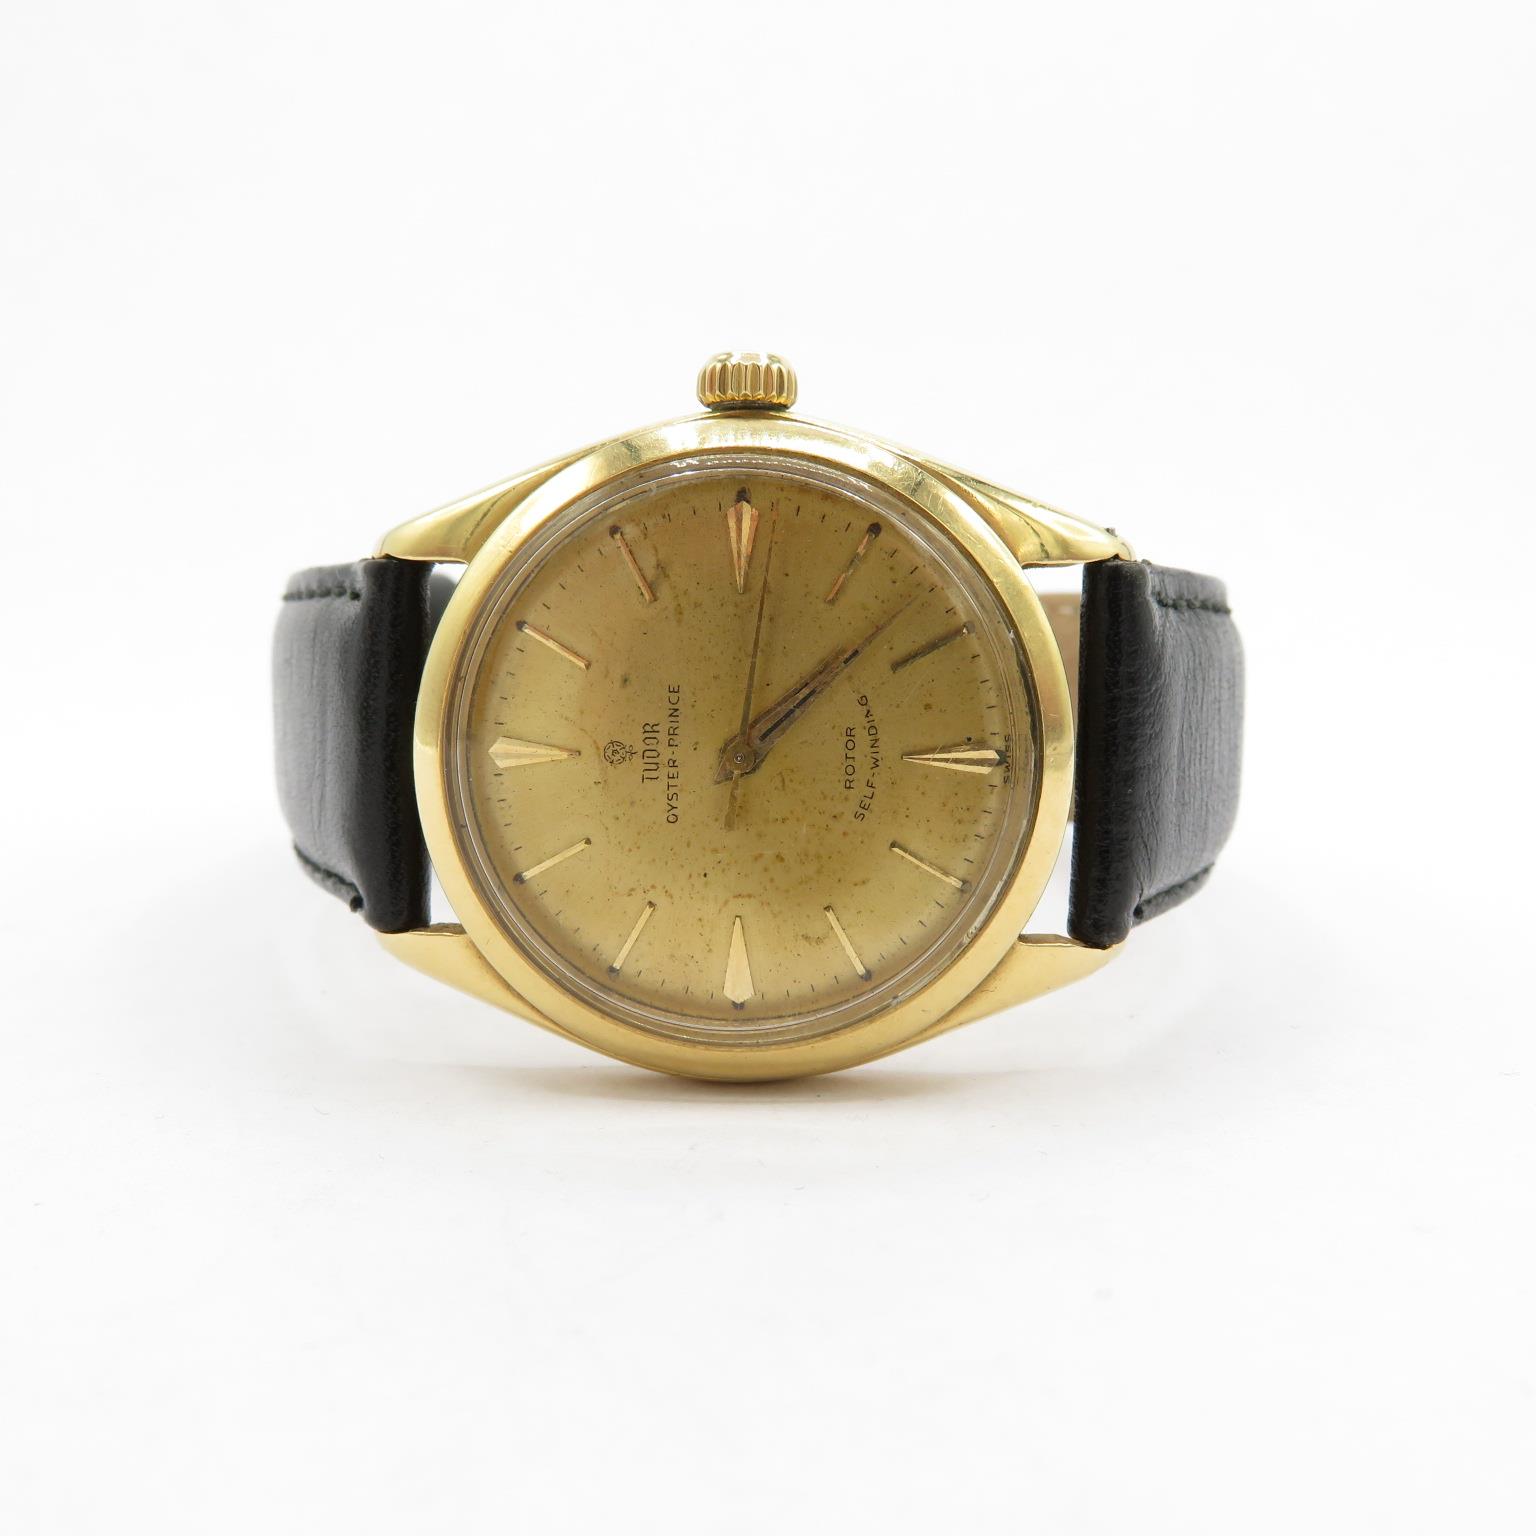 Rare Tudor by Rolex Oyster Prince 18ct gold ref 7965 Gent's vintage 18ct gold watch automatic - Image 5 of 8